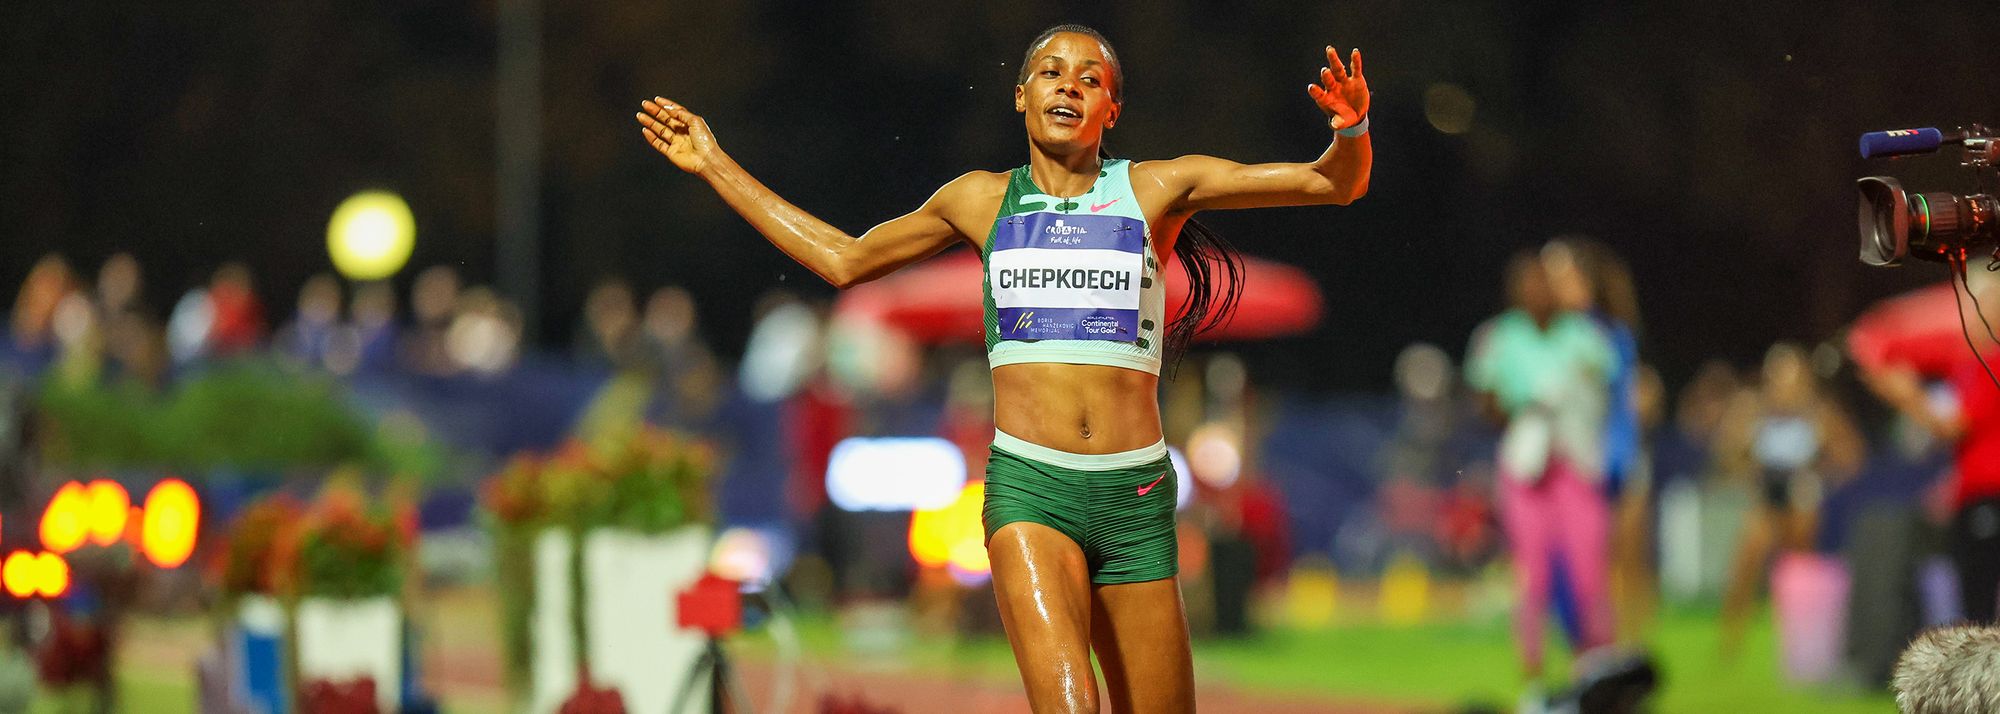 World 3000m steeplechase record-holder Beatrice Chepkoech breaks a world best and a number of meeting records fall at the Boris Hanzekovic Memorial